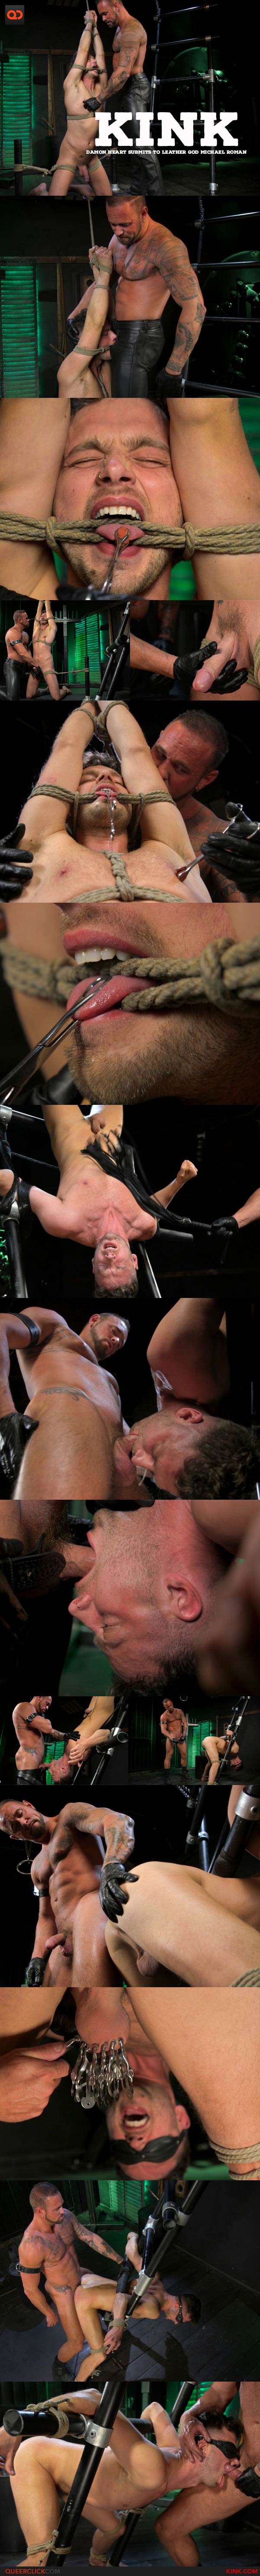 Kink: Damon Heart Submits to Leather God Michael Roman